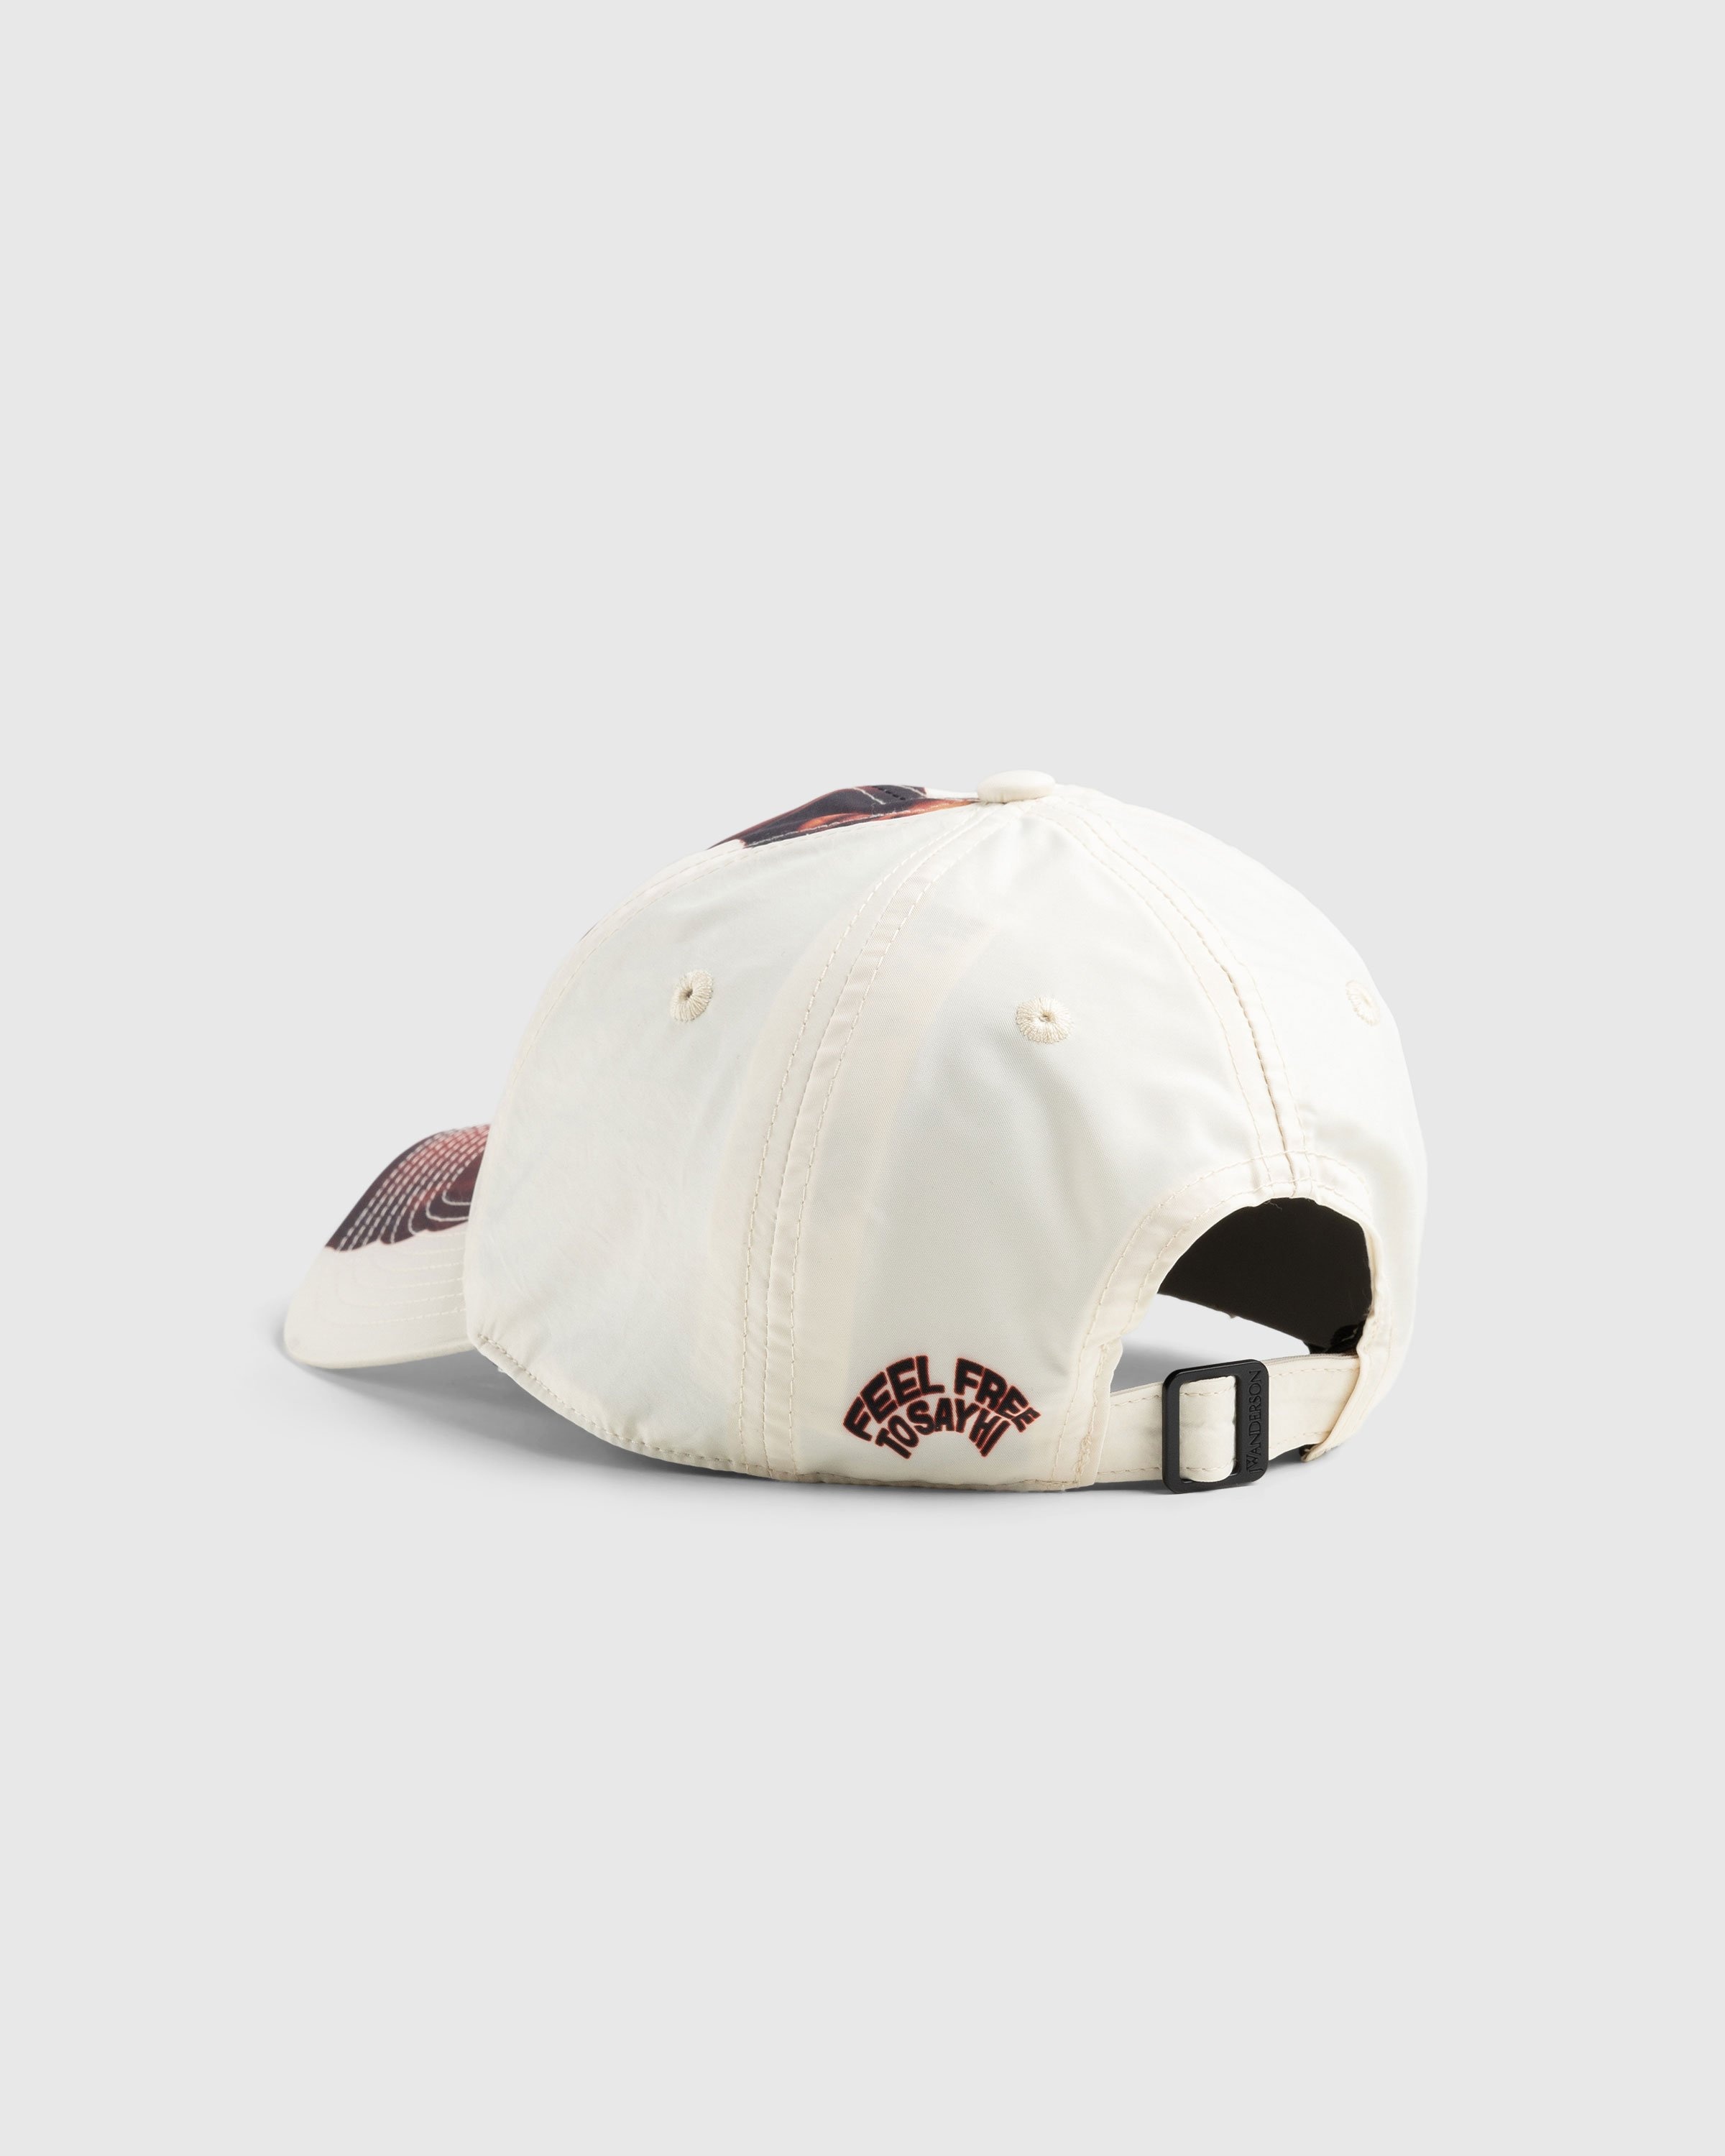 J.W. Anderson – Logo Embroidered Baseball Cap Off White - Hats - White - Image 3